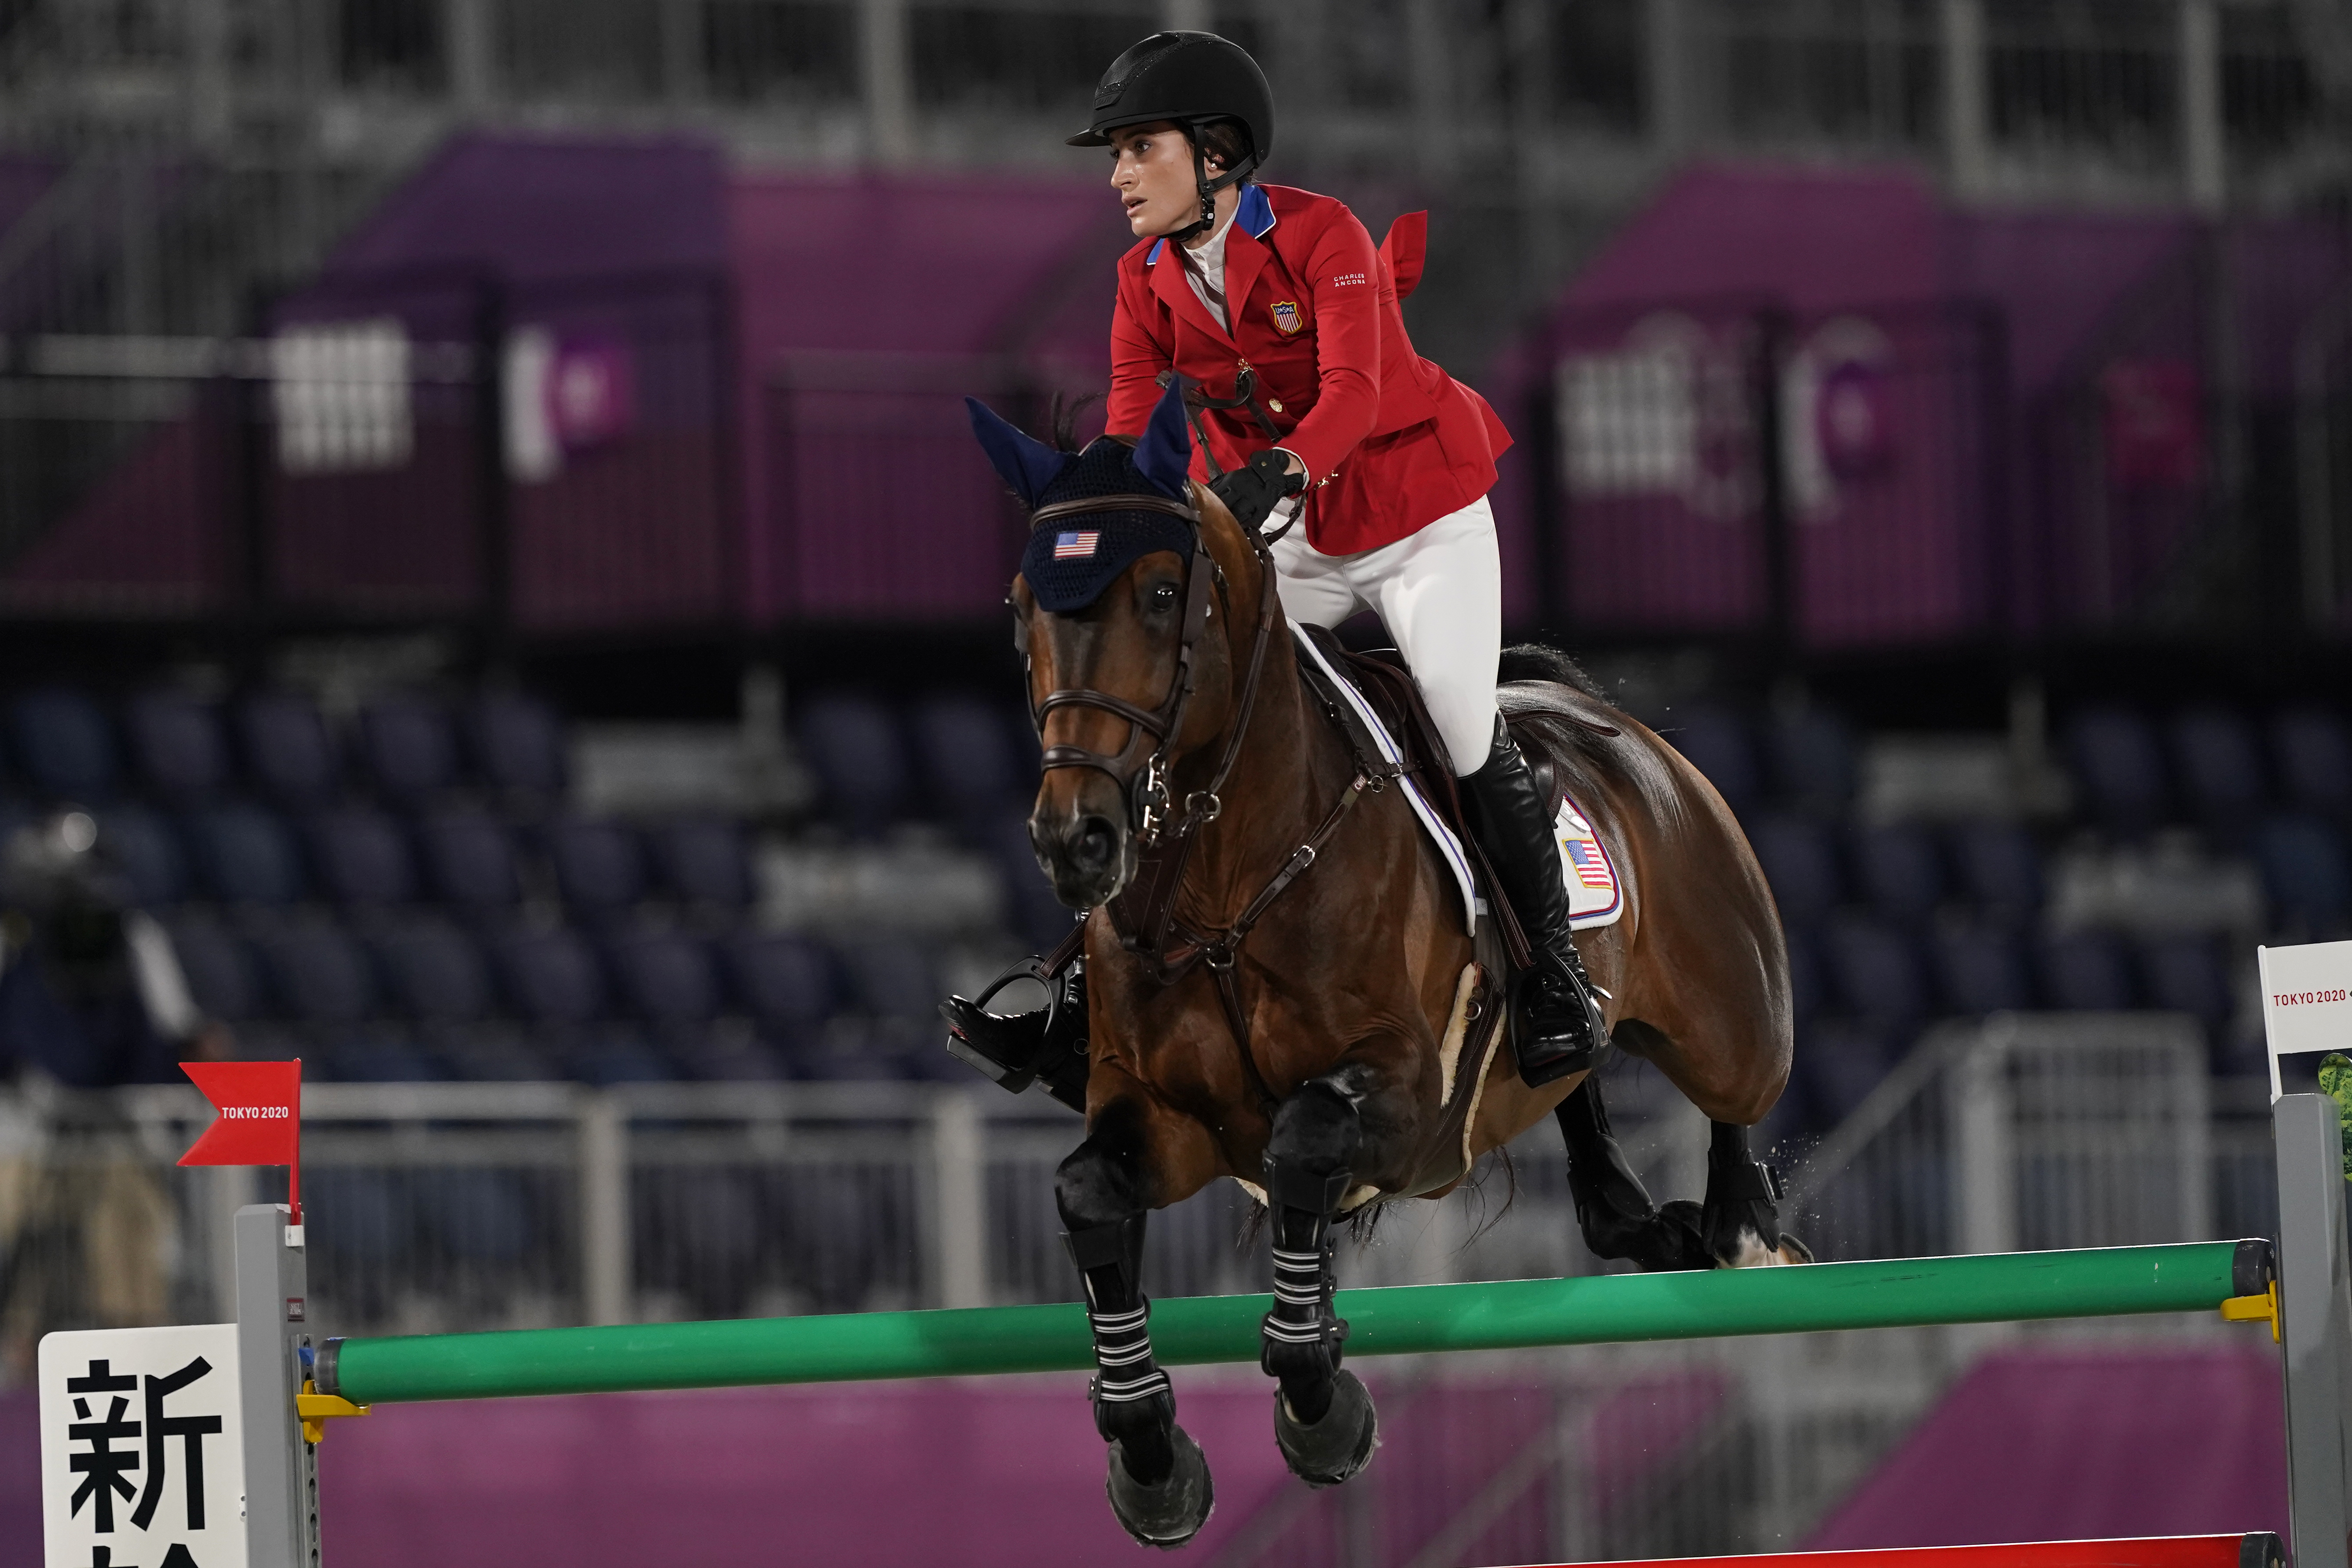 United States’ Jessica Springsteen, riding Don Juan van de Donkhoeve, competes during the equestrian jumping team qualifying at Equestrian Park in Tokyo.